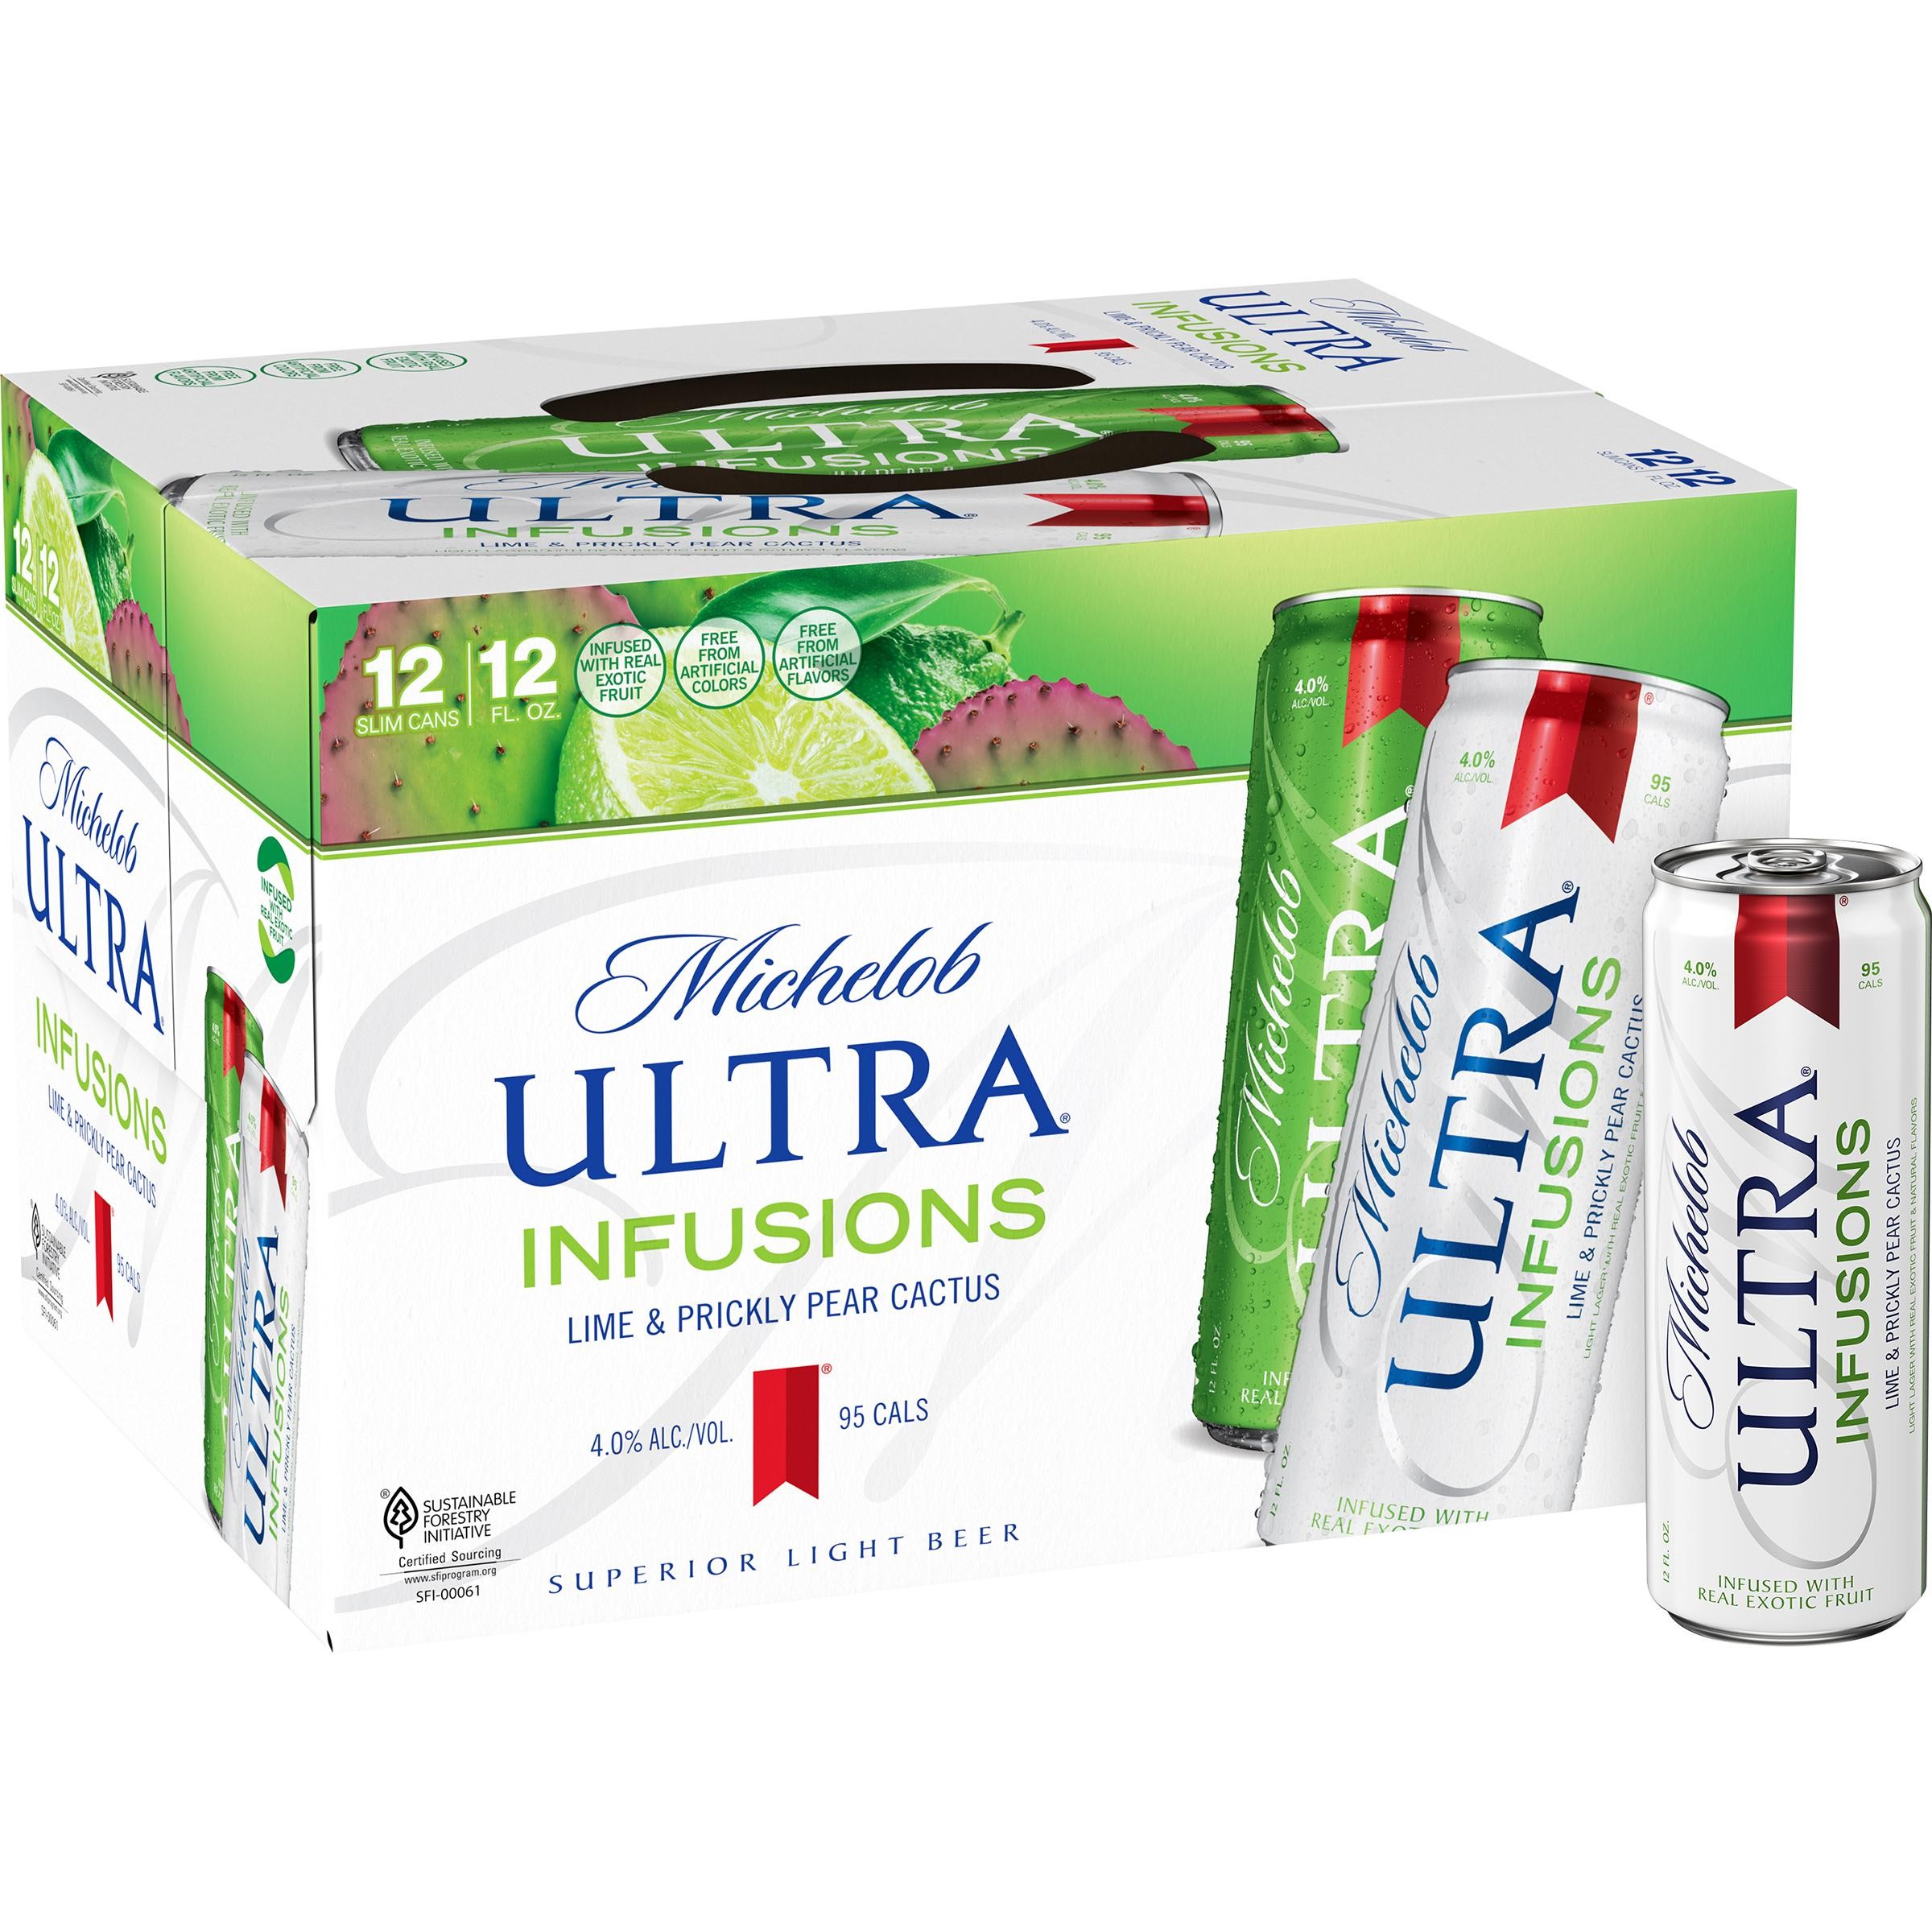 Michelob Ultra Infusions Lime Cactus - 12 Pack Cans